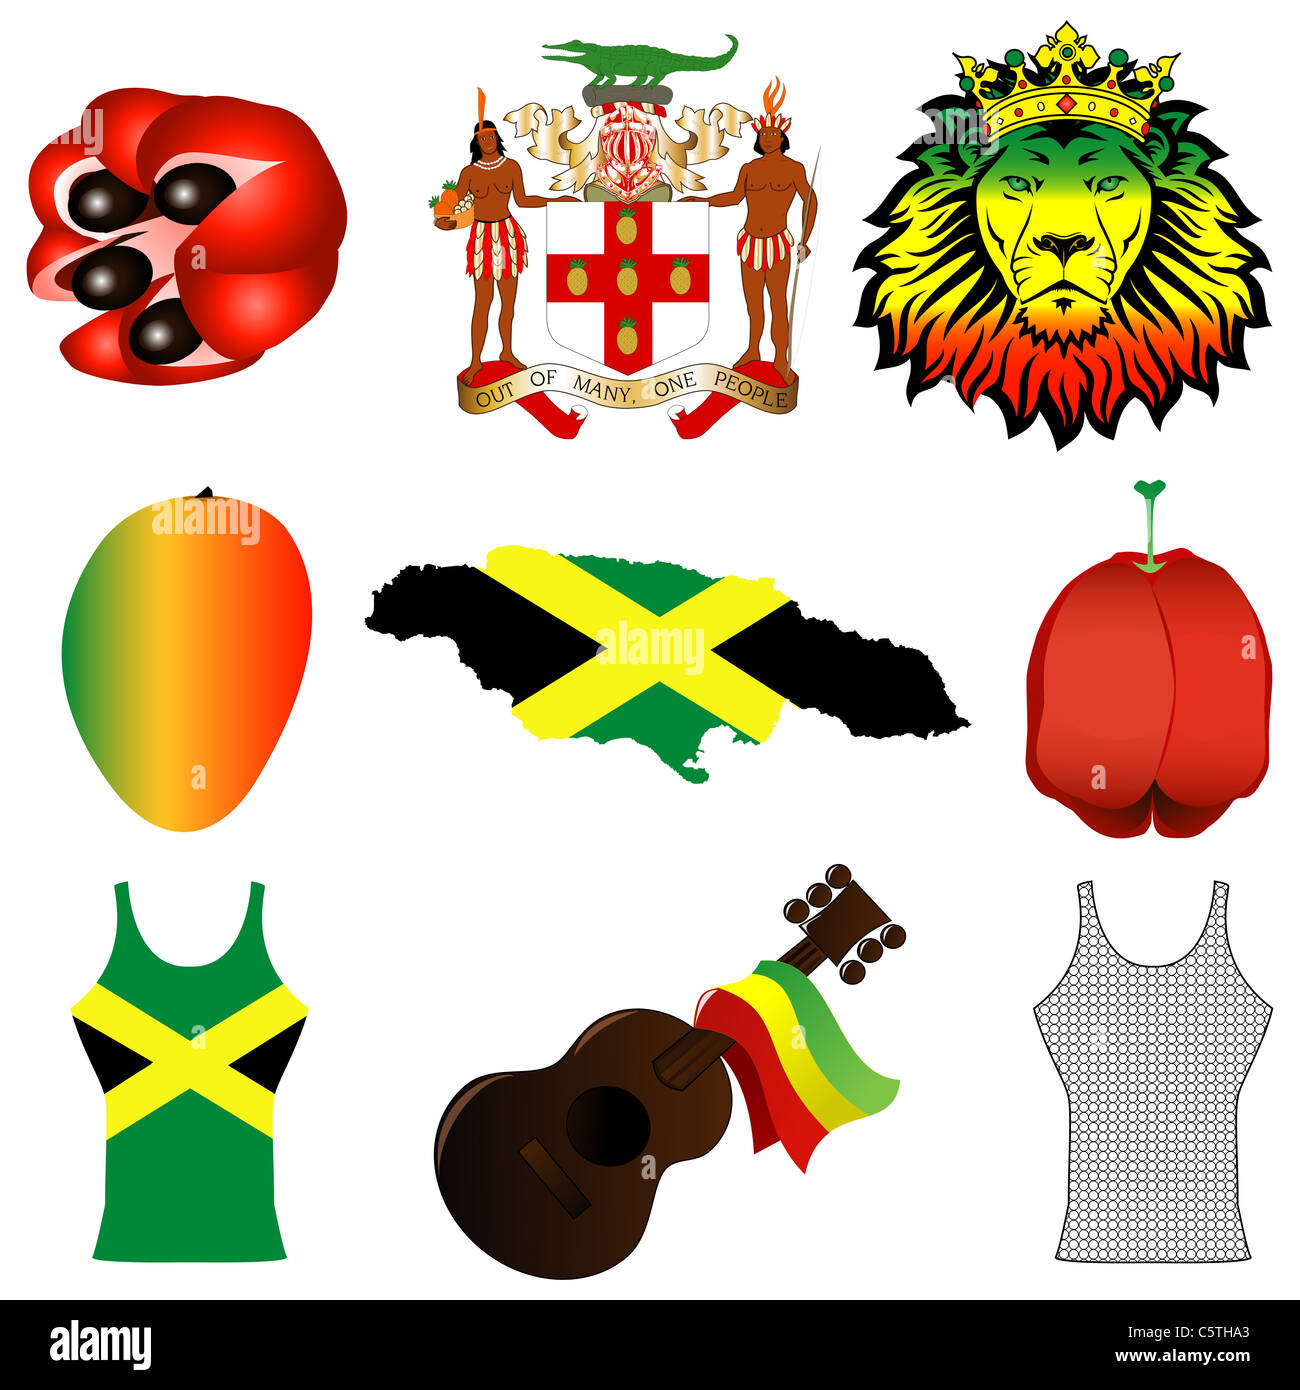 Vector Illustration of 9 different Jamaican icons. Stock Photo